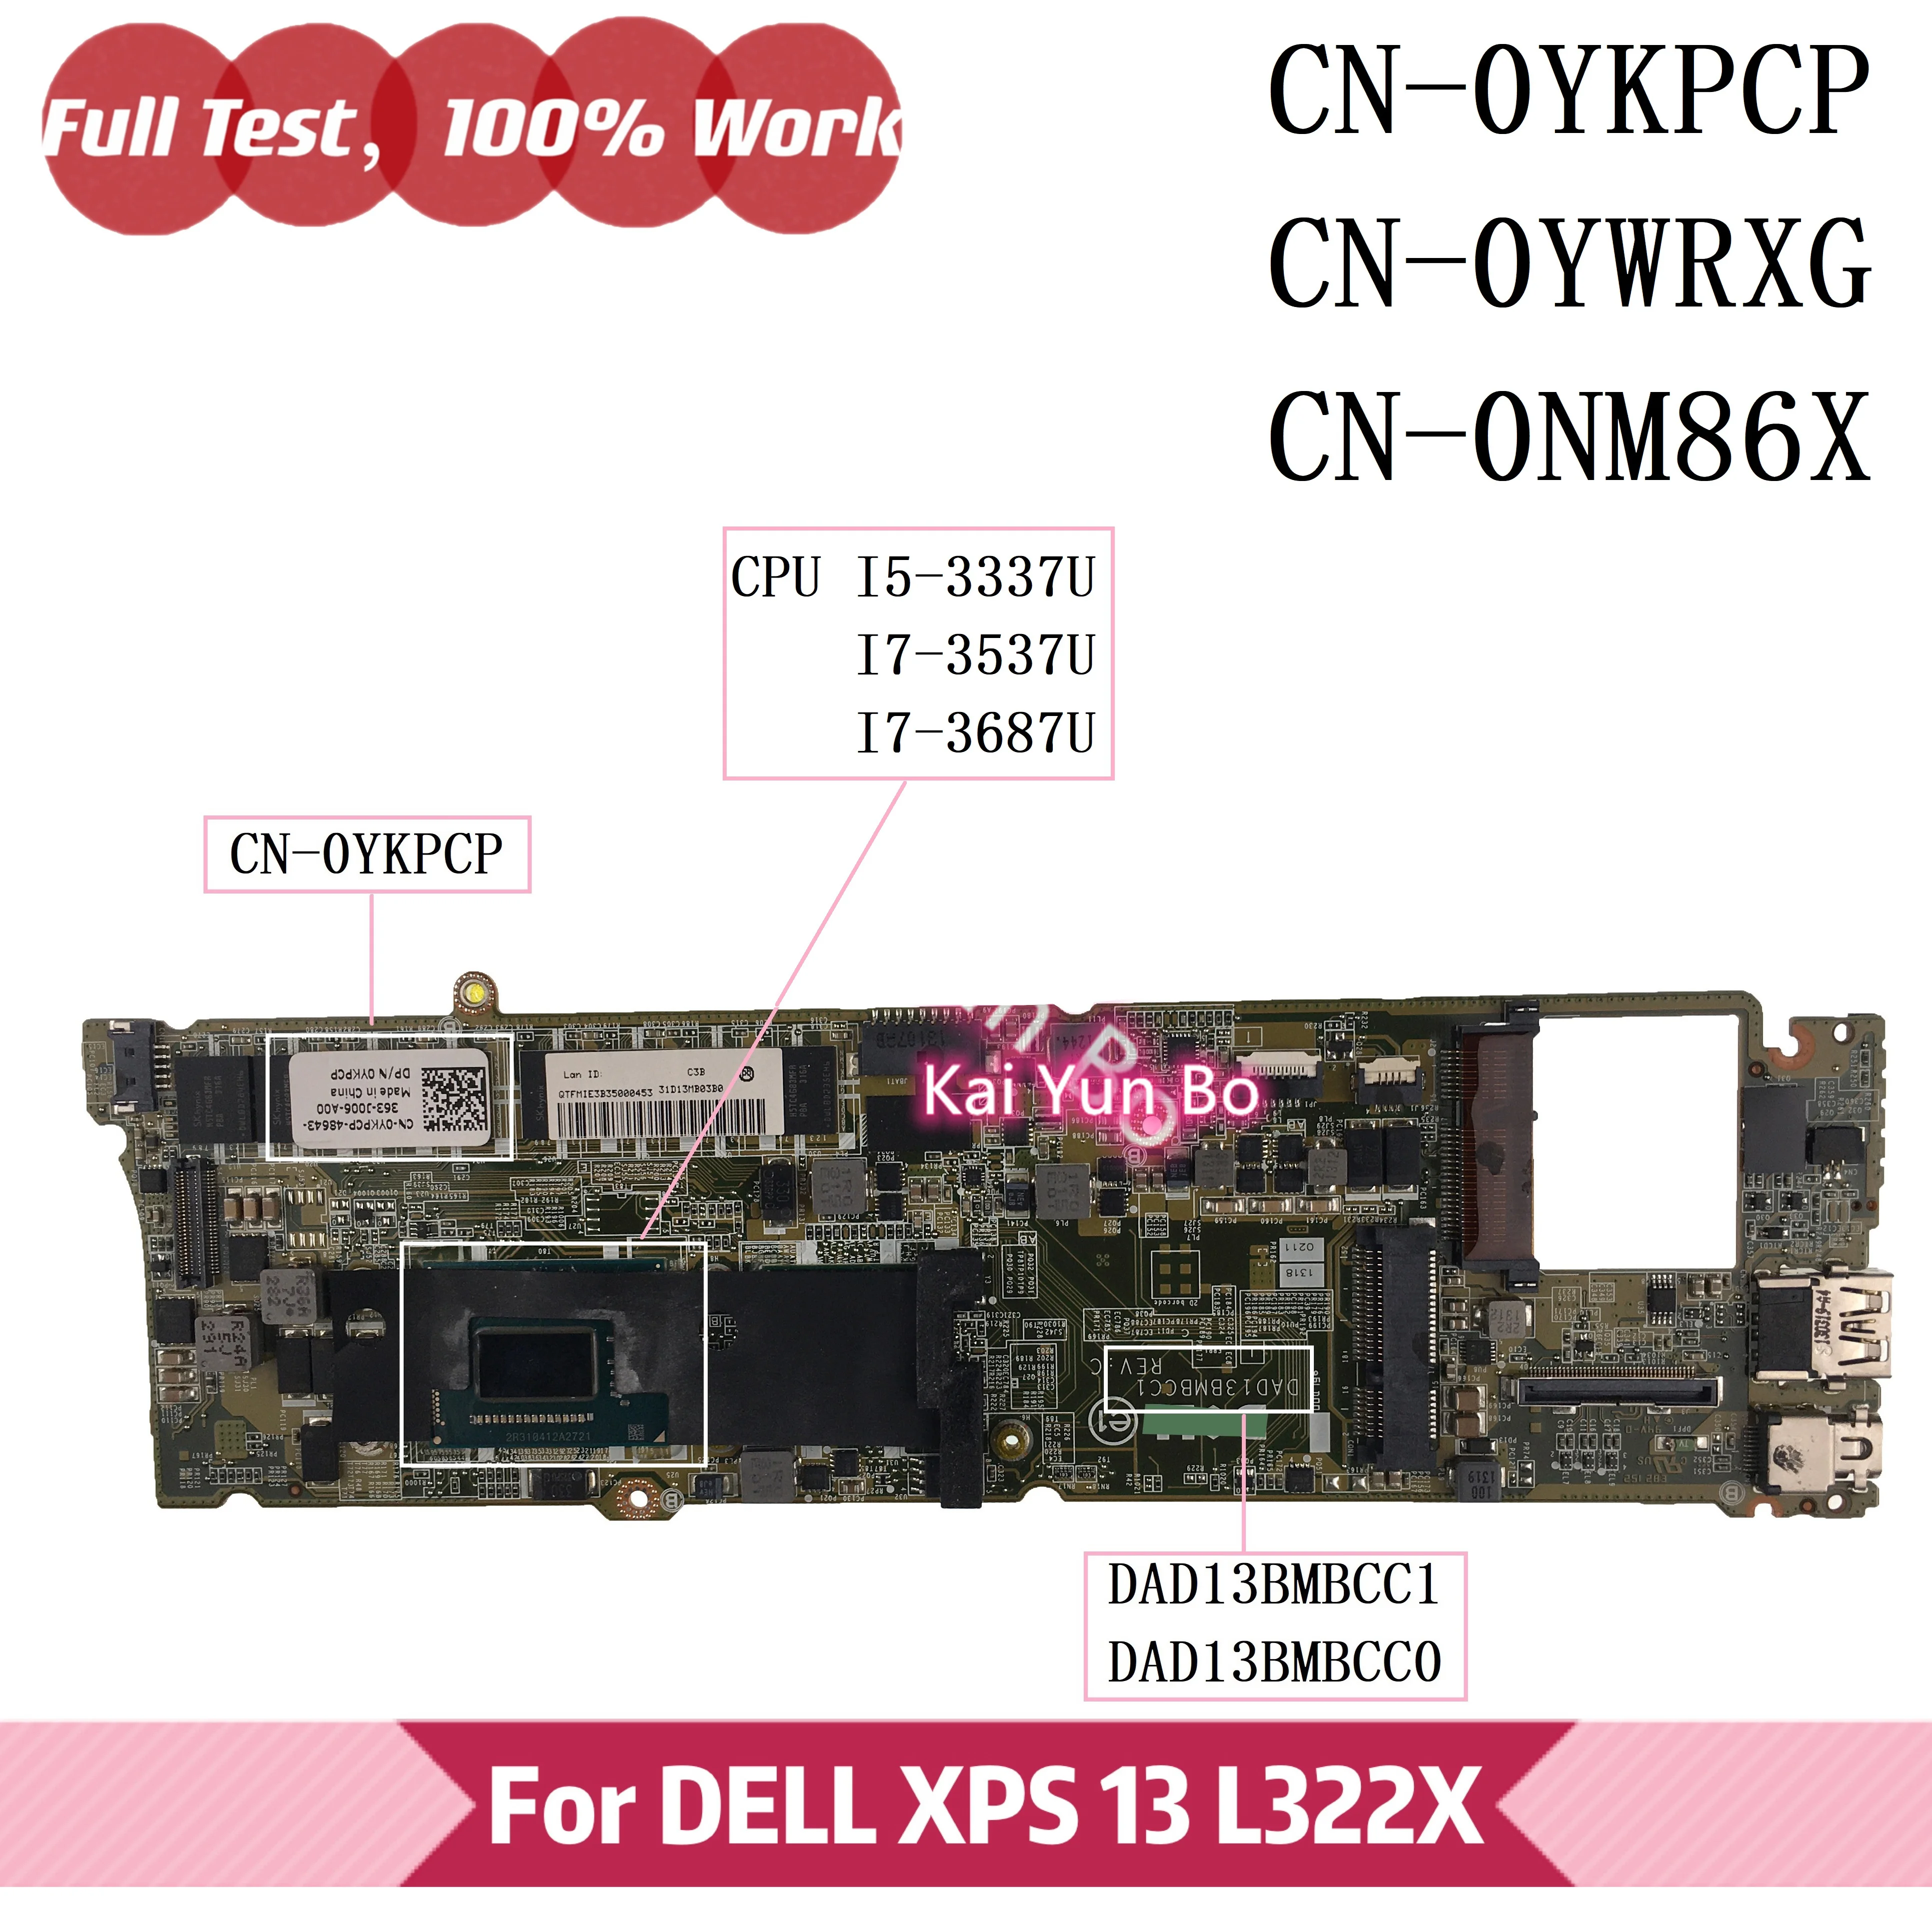 

Mainboard DAD13BMBCC1 For DELL XPS 13 L322X Laptop Motherboard DAD13BMBCC0 CN-0YKPCP 0YKPCP YKPCP YWRXG 0YWRXG 0NM86X With I7 I5